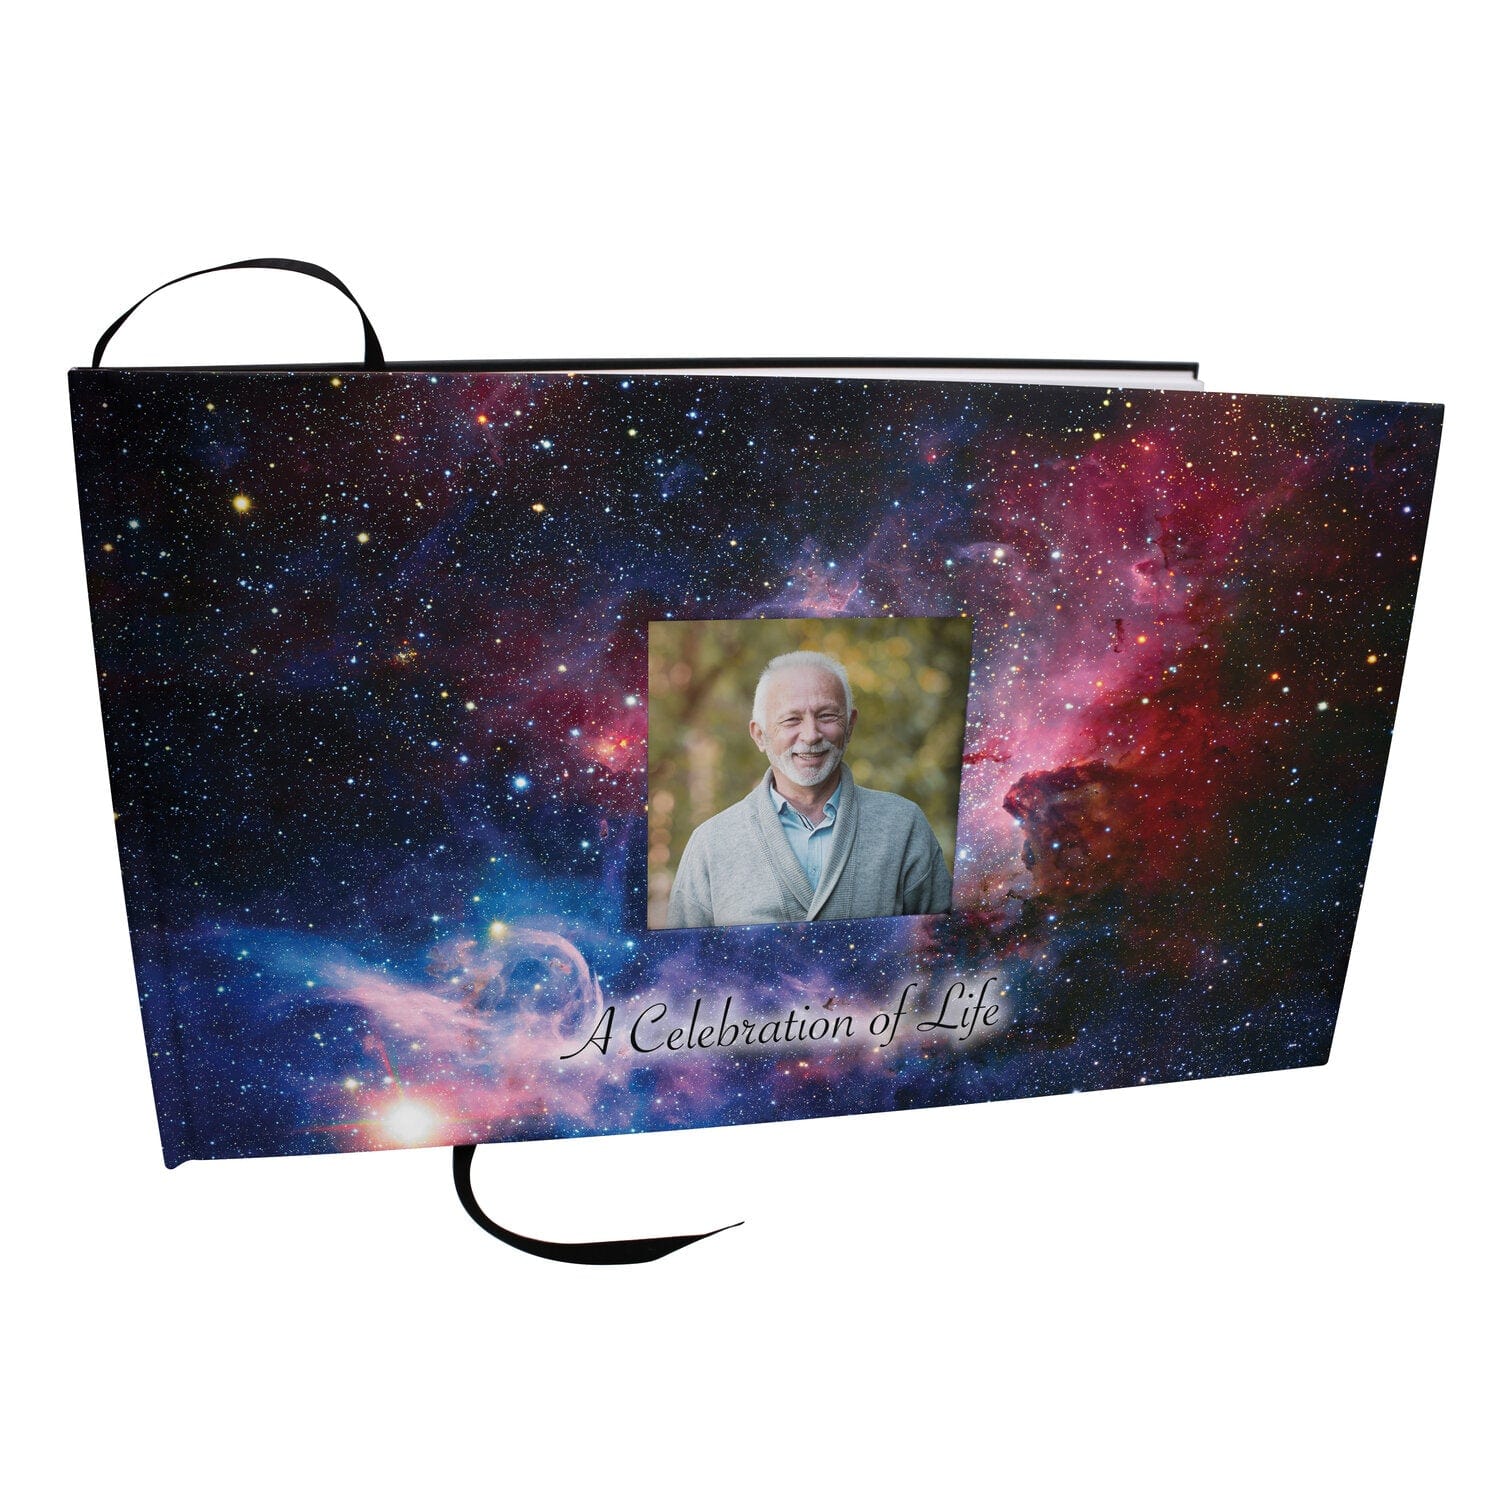 Commemorative Cremation Urns Home & Garden Cosmic Galaxy Matching Themed 'Celebration of Life' Guest Book for Funeral or Memorial Service